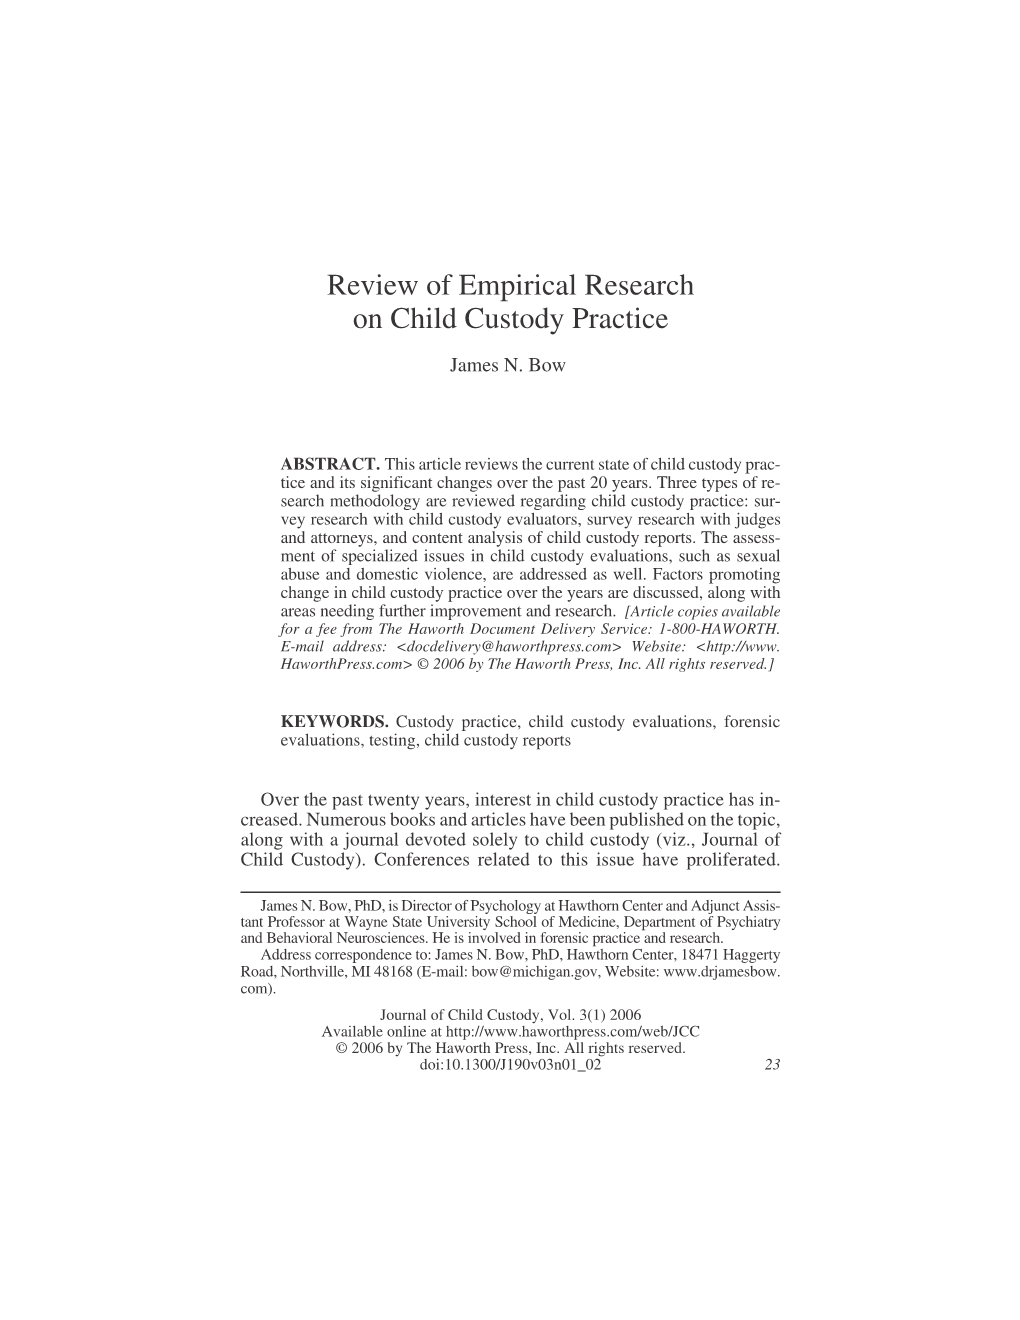 Review of Empirical Research on Child Custody Practice